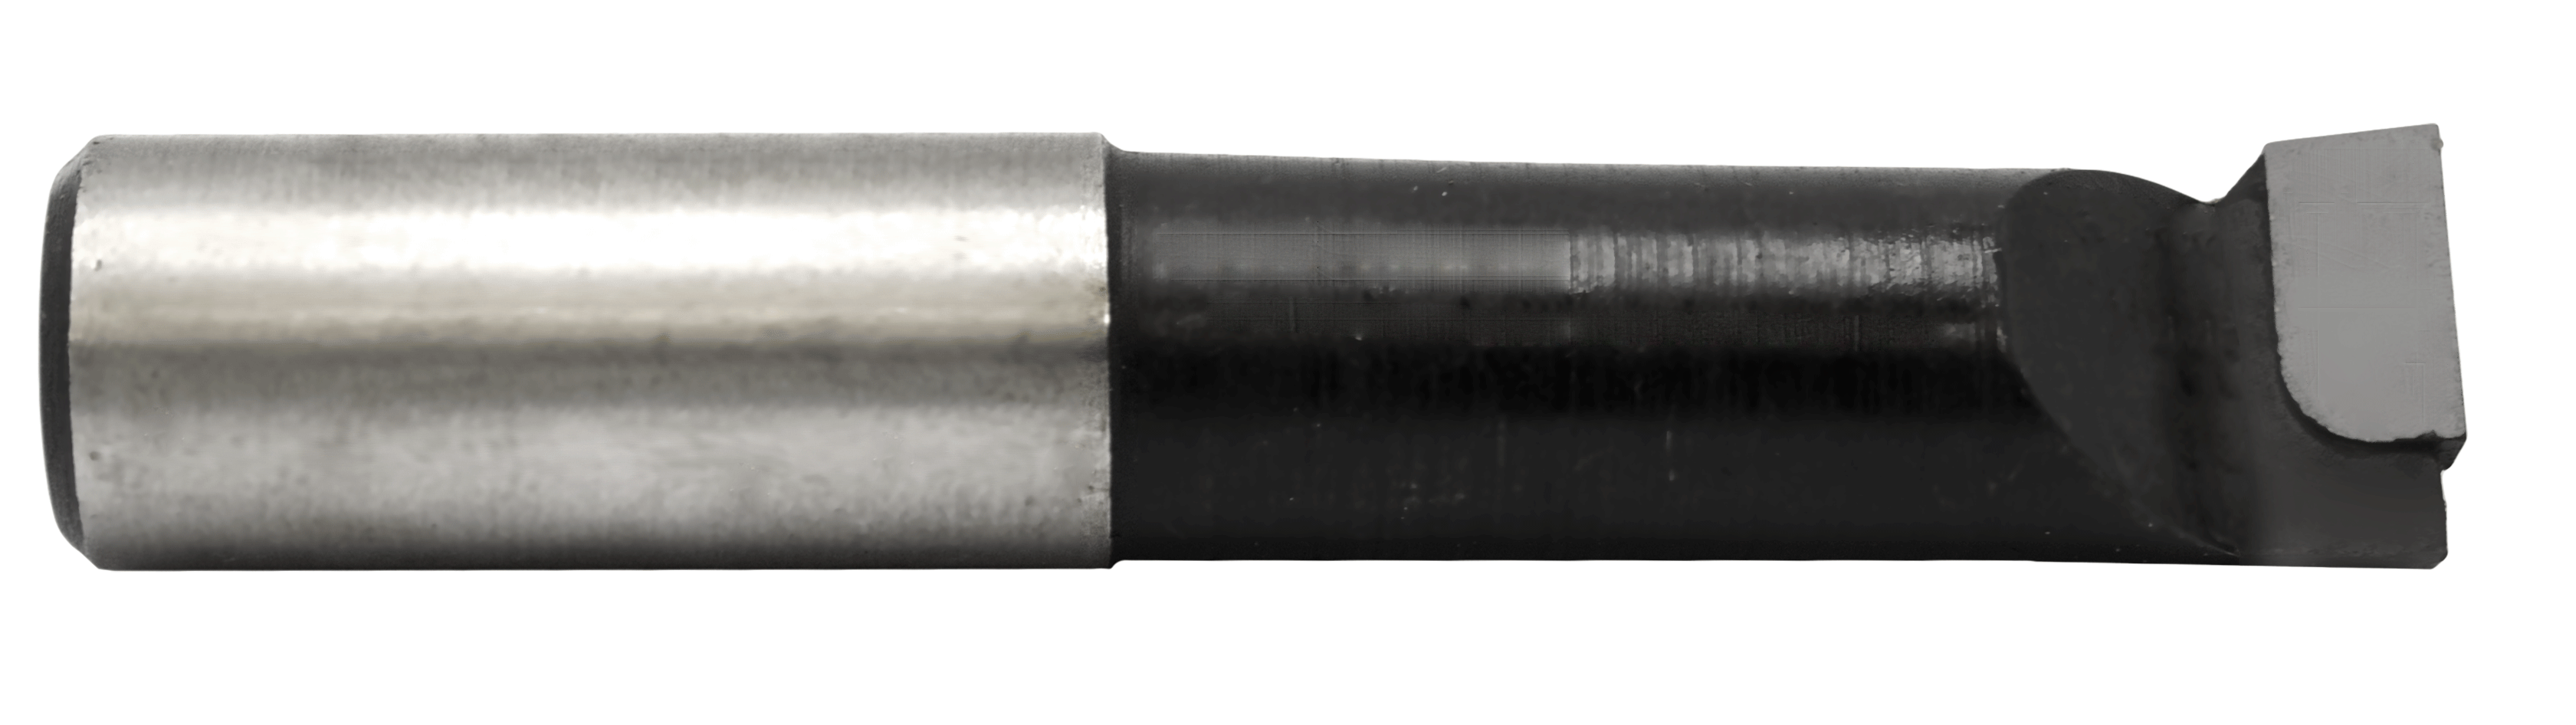 Super-Bore 1" C-6 for Steel Applications  - APT - USA